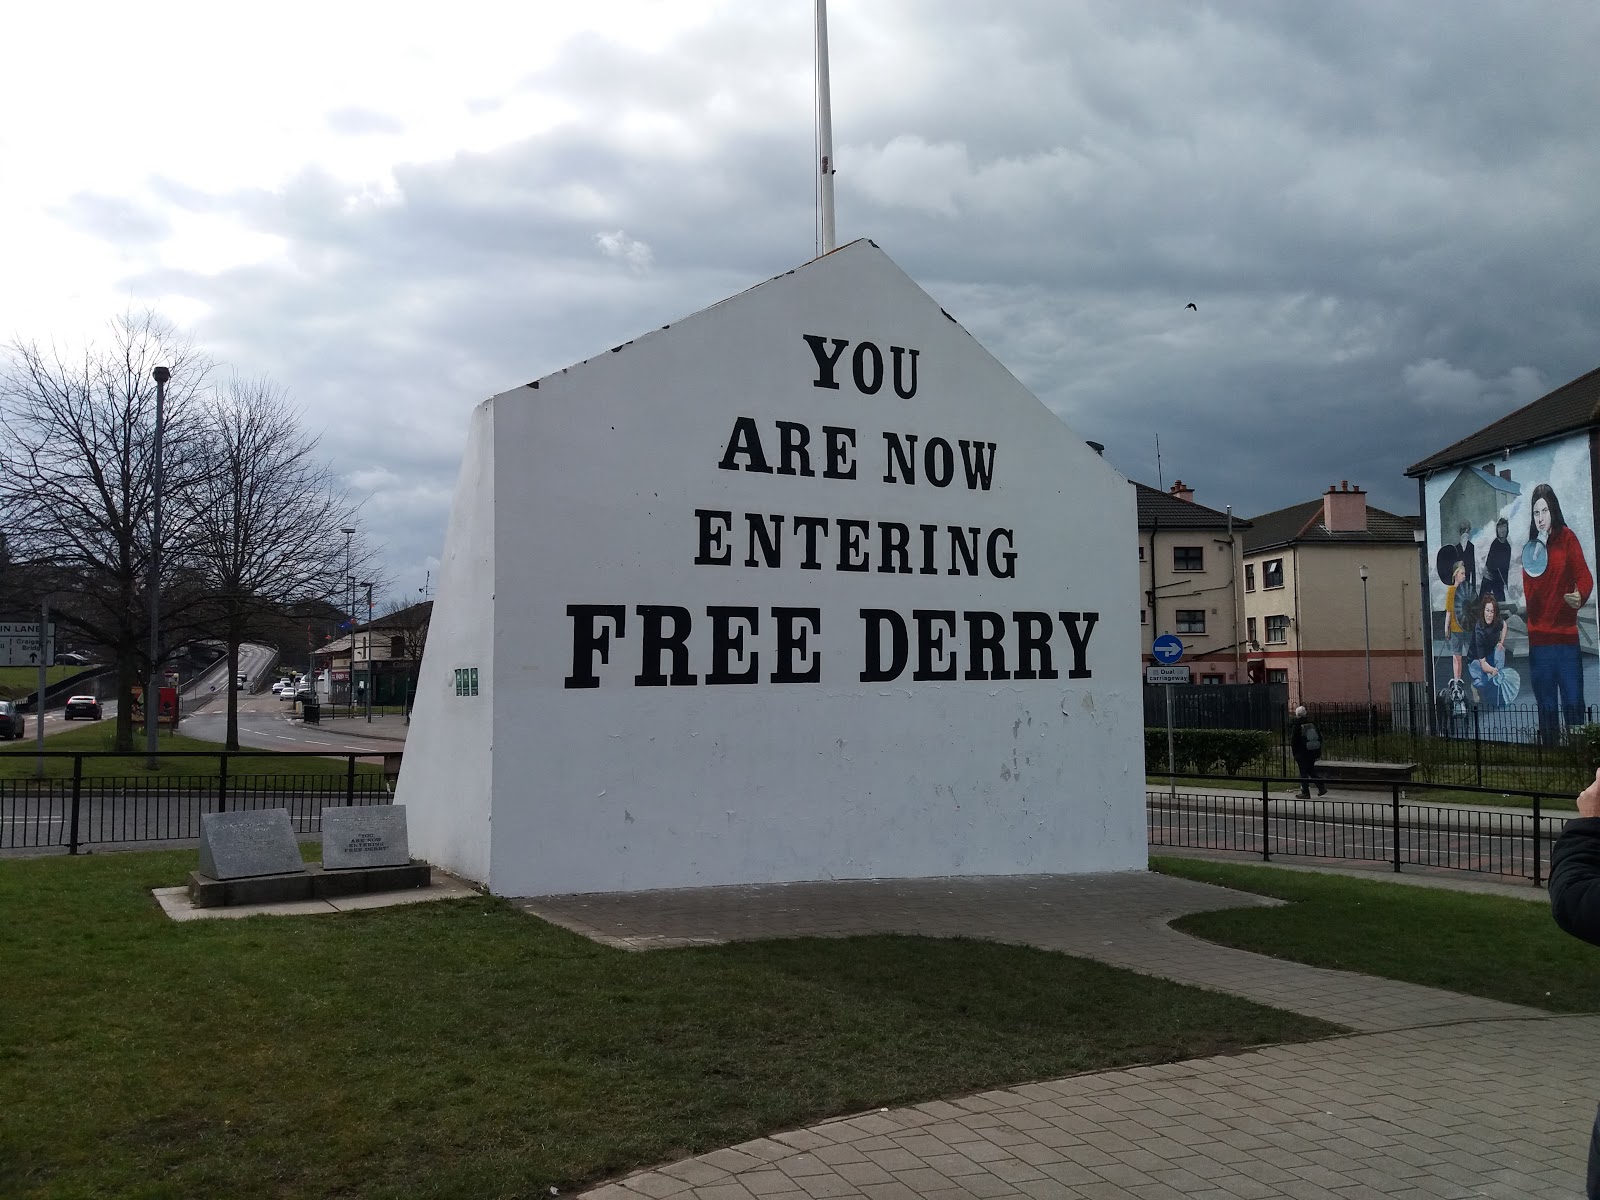 https://whatremovals.co.uk/wp-content/uploads/2022/02/Museum of Free Derry-300x225.jpeg